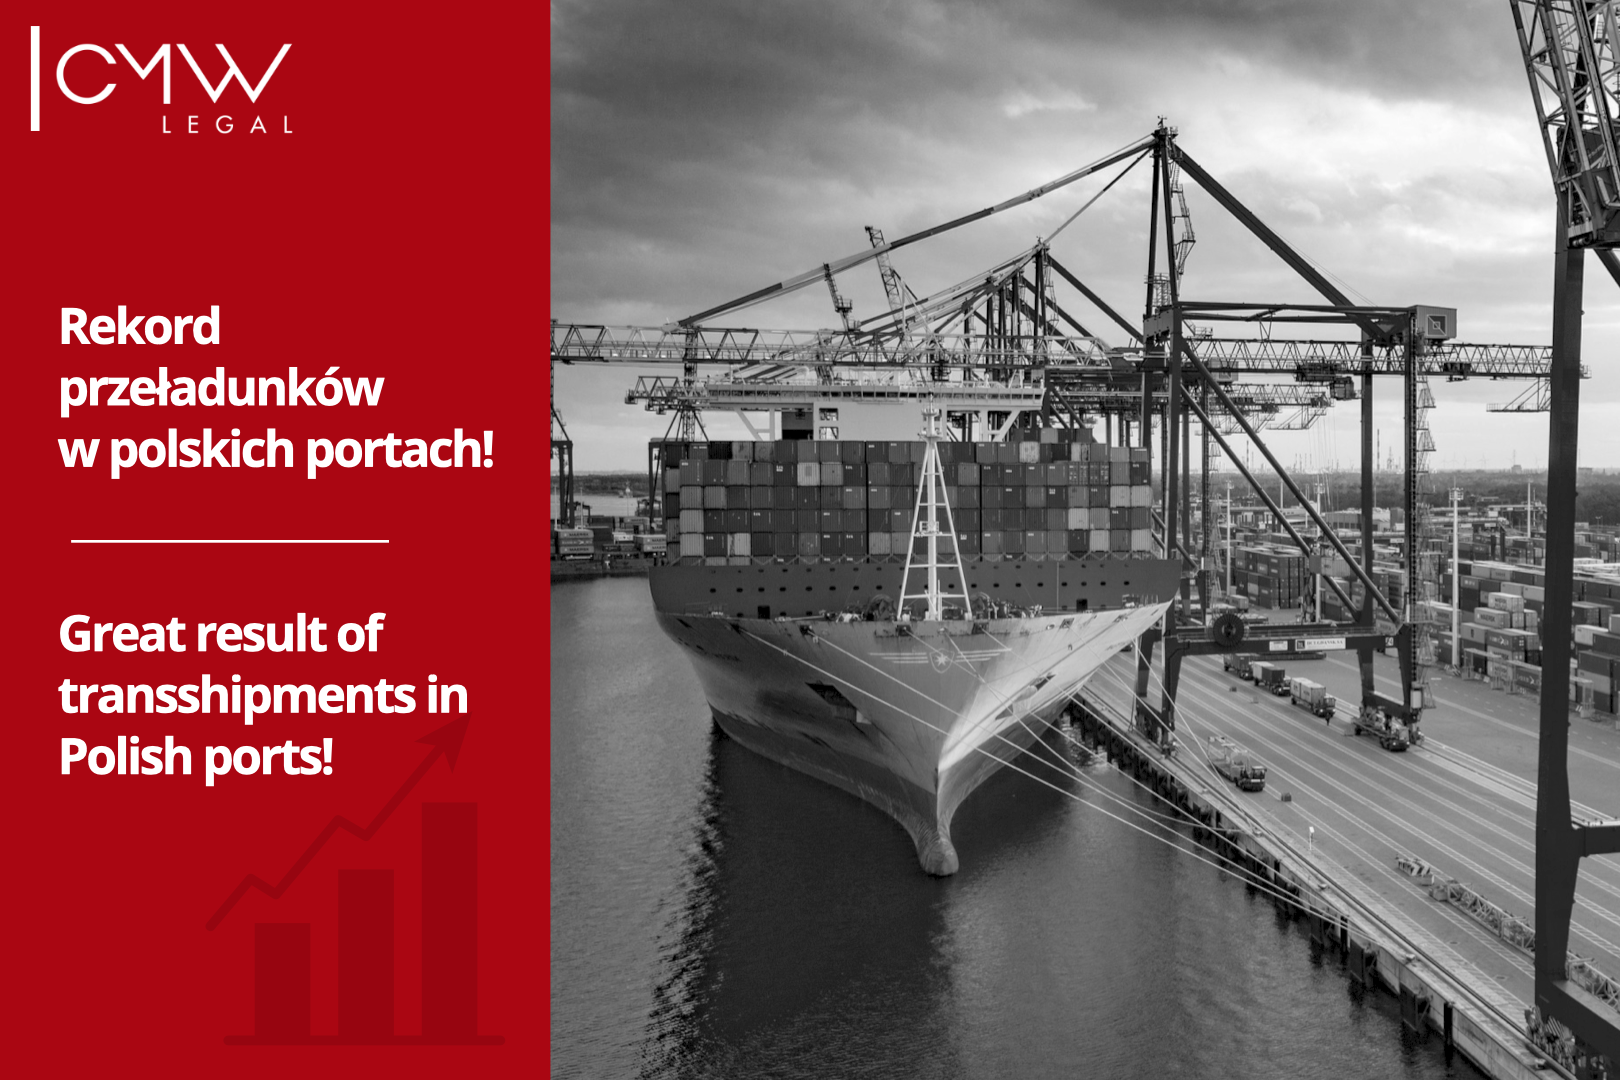  Transshipment record in Polish ports. Port of Gdańsk with the highest score ever!